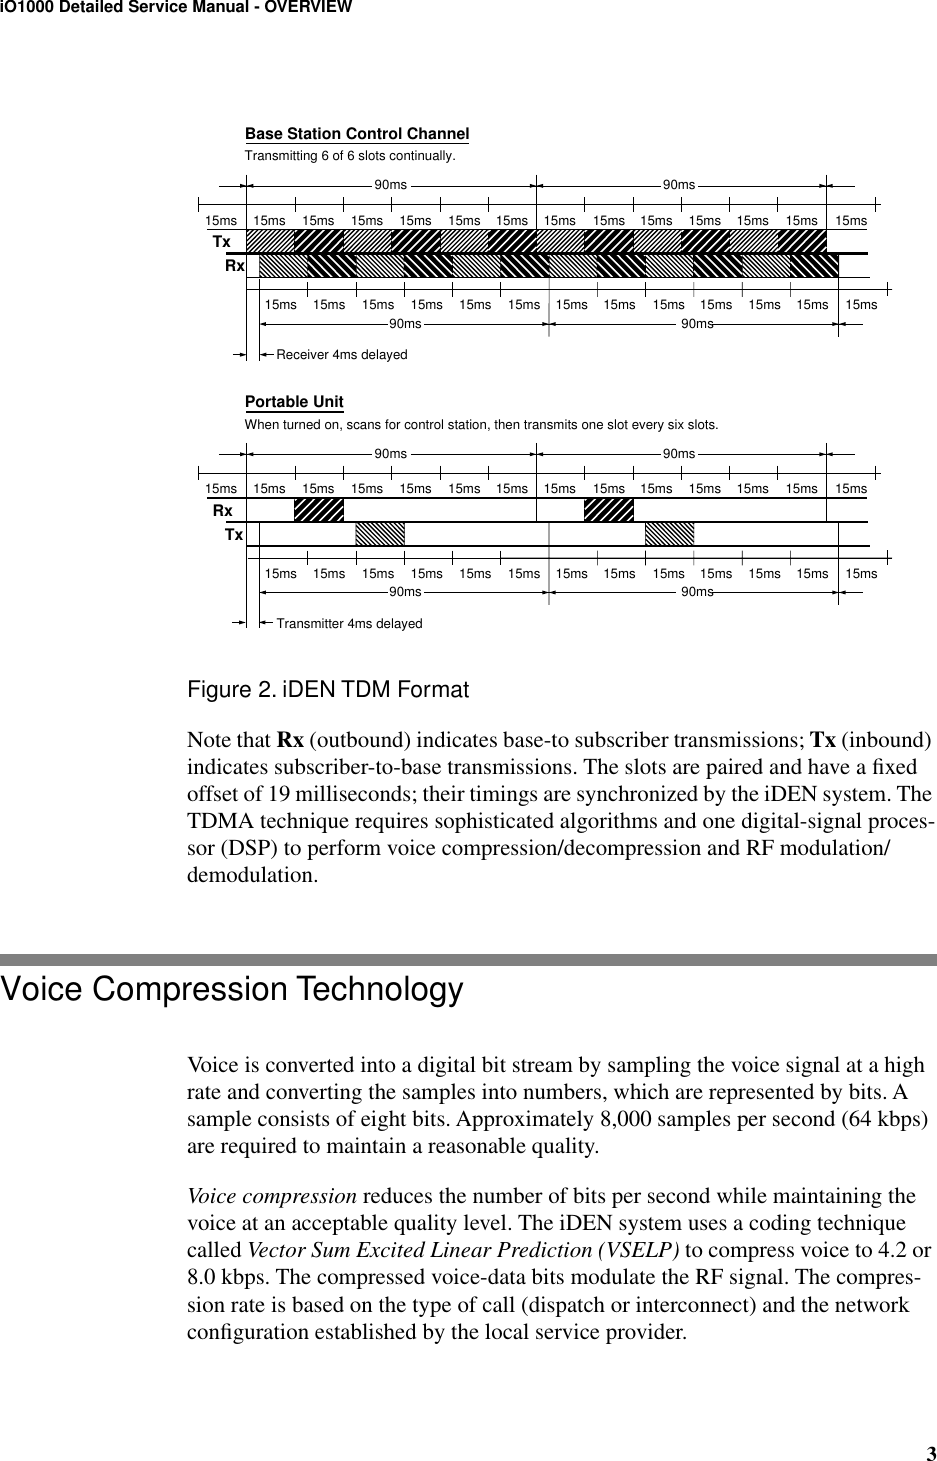  3 iO1000 Detailed Service Manual - OVERVIEW Figure 2. iDEN TDM Format Note that  Rx  (outbound) indicates base-to subscriber transmissions;  Tx  (inbound) indicates subscriber-to-base transmissions. The slots are paired and have a ﬁxed offset of 19 milliseconds; their timings are synchronized by the iDEN system. The TDMA technique requires sophisticated algorithms and one digital-signal proces-sor (DSP) to perform voice compression/decompression and RF modulation/demodulation. Voice Compression Technology Voice is converted into a digital bit stream by sampling the voice signal at a high rate and converting the samples into numbers, which are represented by bits. A sample consists of eight bits. Approximately 8,000 samples per second (64 kbps) are required to maintain a reasonable quality. Voice compression  reduces the number of bits per second while maintaining the voice at an acceptable quality level. The iDEN system uses a coding technique called  Vector Sum Excited Linear Prediction (VSELP)  to compress voice to 4.2 or 8.0 kbps. The compressed voice-data bits modulate the RF signal. The compres-sion rate is based on the type of call (dispatch or interconnect) and the network conﬁguration established by the local service provider.15ms15ms 15ms15ms 15ms 15ms 15ms 15ms 15ms 15ms 15ms 15ms 15ms15ms90ms 90ms15ms15ms 15ms 15ms 15ms 15ms 15ms 15ms 15ms 15ms 15ms 15ms15ms90ms  90msTxRxReceiver 4ms delayedTransmitting 6 of 6 slots continually.15ms15ms 15ms15ms 15ms 15ms 15ms 15ms 15ms 15ms 15ms 15ms 15ms15ms90ms 90ms15ms15ms 15ms 15ms 15ms 15ms 15ms 15ms 15ms 15ms 15ms 15ms15ms90ms  90msRxTxTransmitter 4ms delayedWhen turned on, scans for control station, then transmits one slot every six slots.Base Station Control ChannelPortable Unit